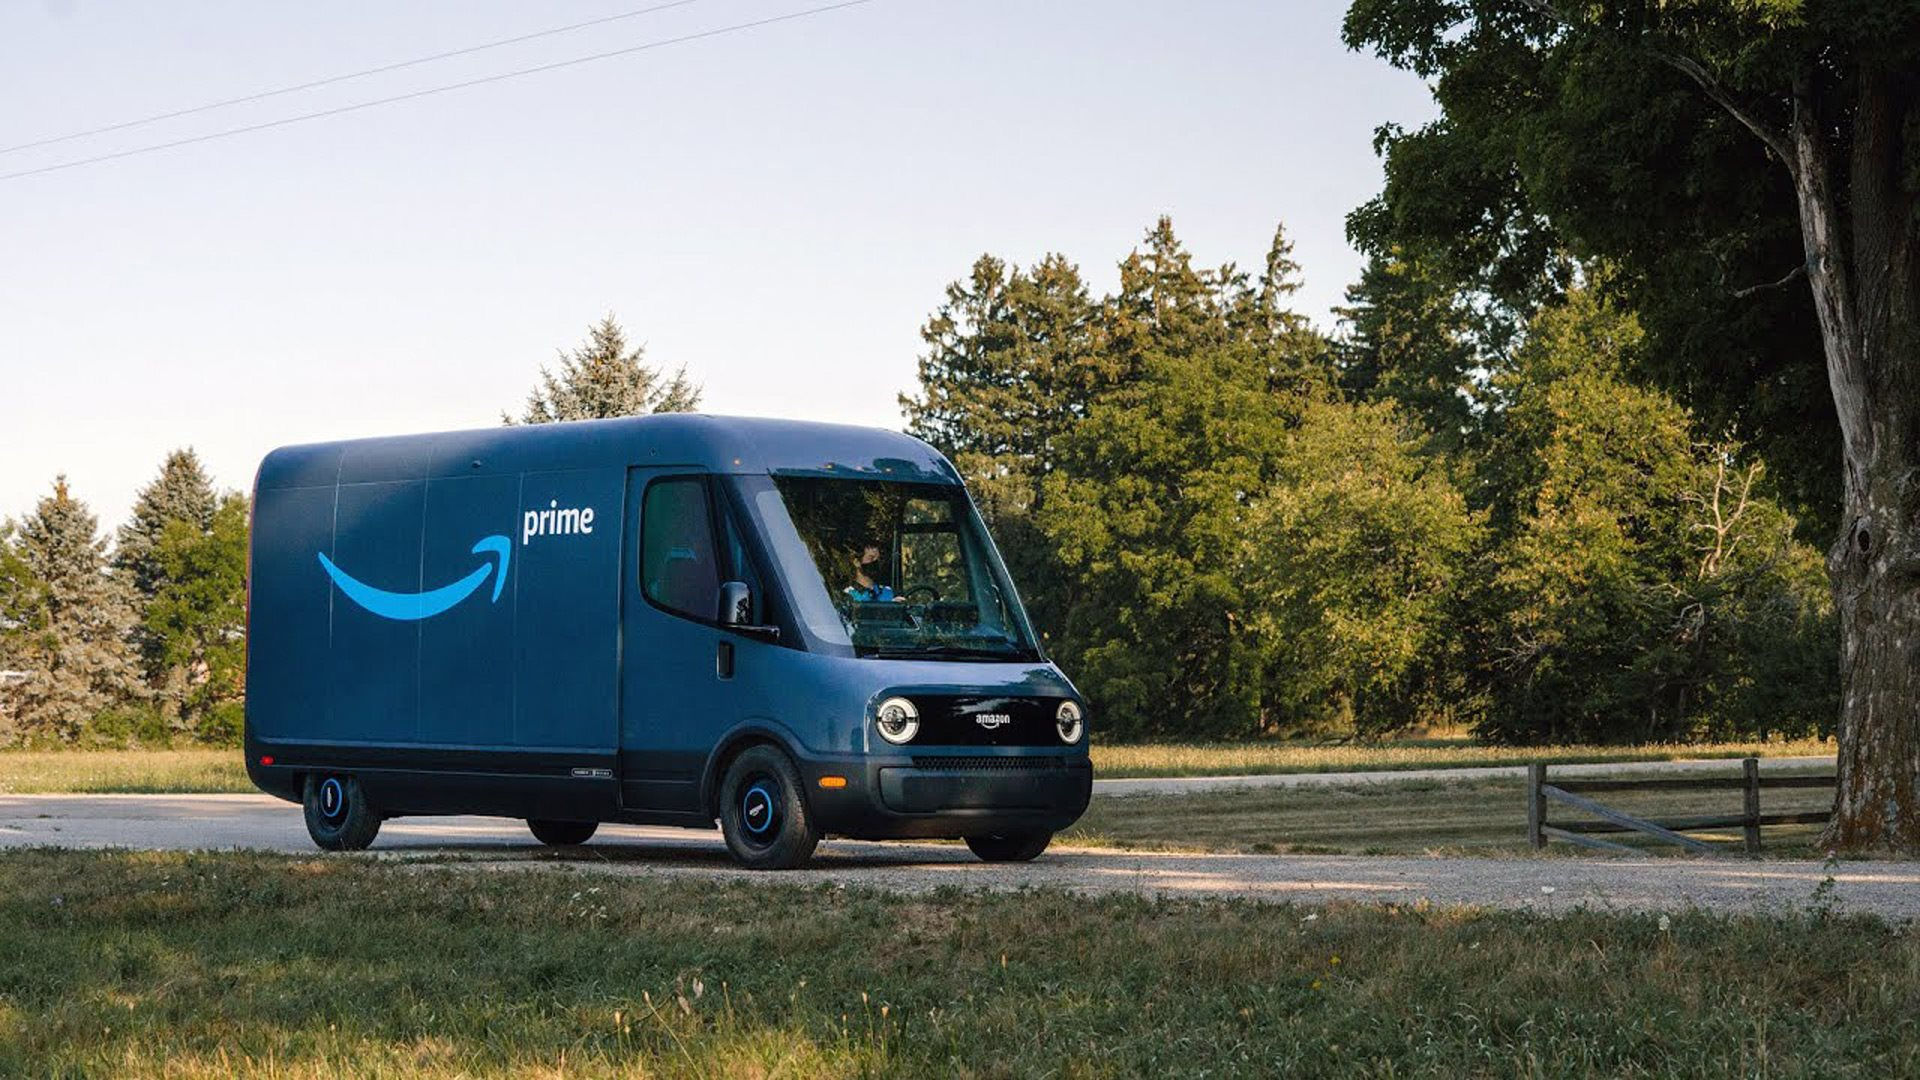 amazon-electric-delivery-van-designed-by-rivian_100764229_h.jpg